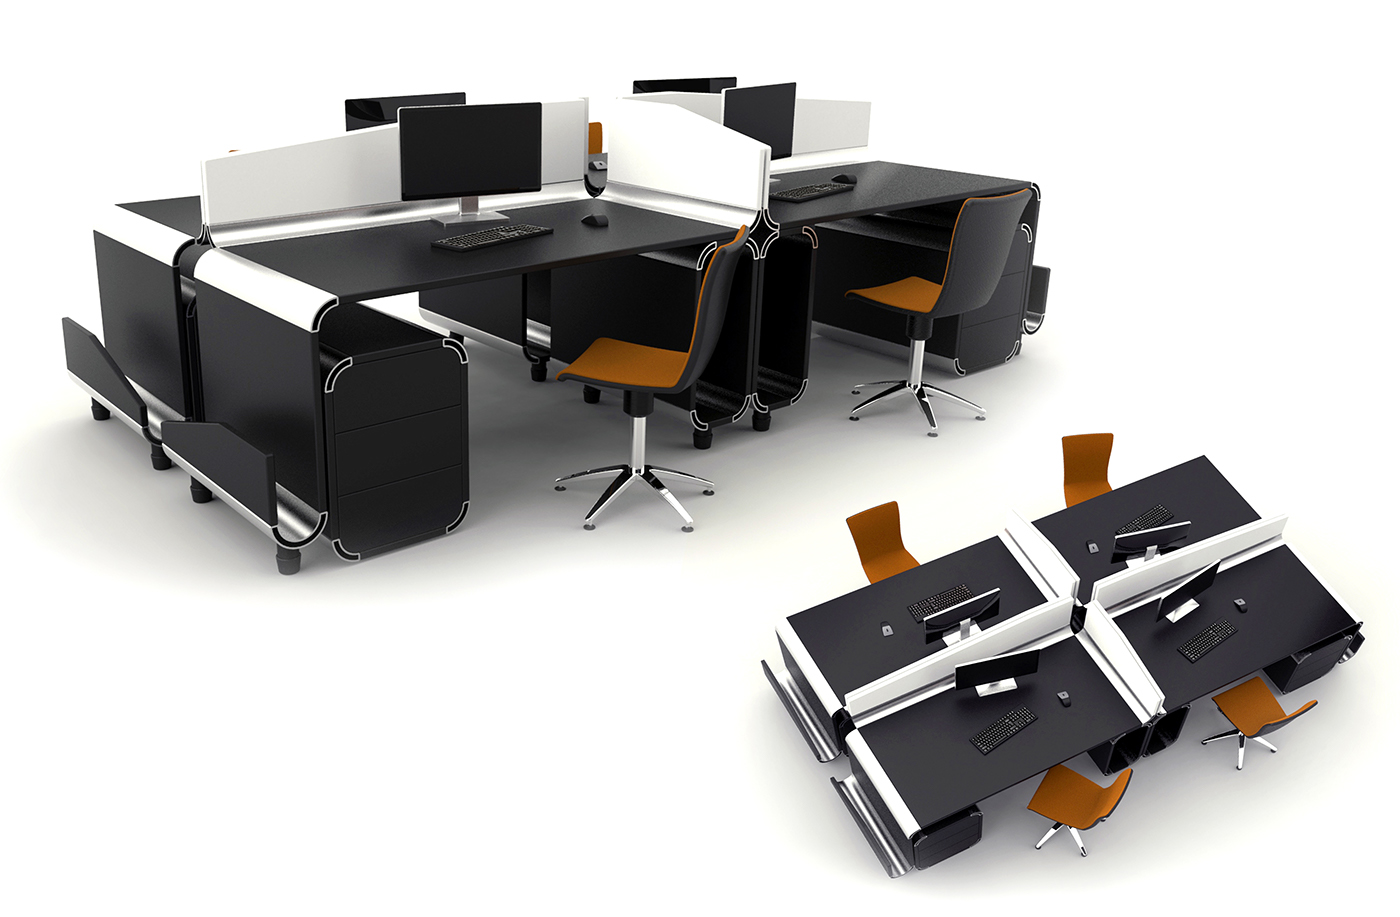 furniture table Office Office Space Work desk